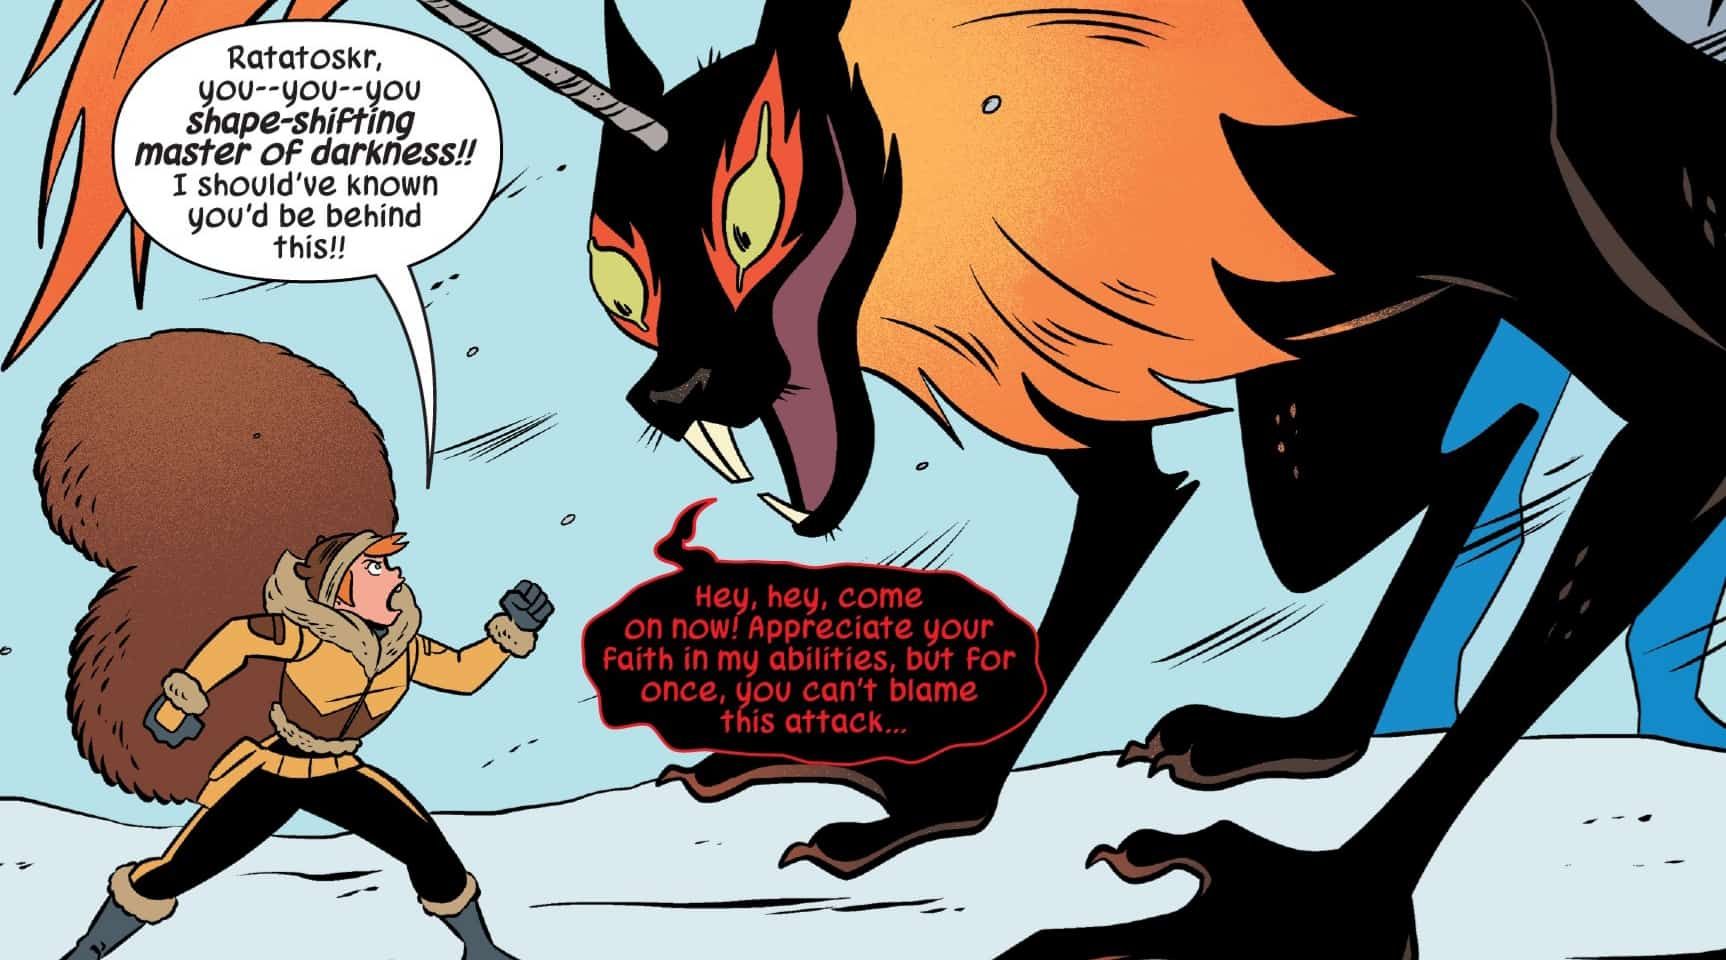 ratatoskr, as a giant squirrel, stares down squirrel girl